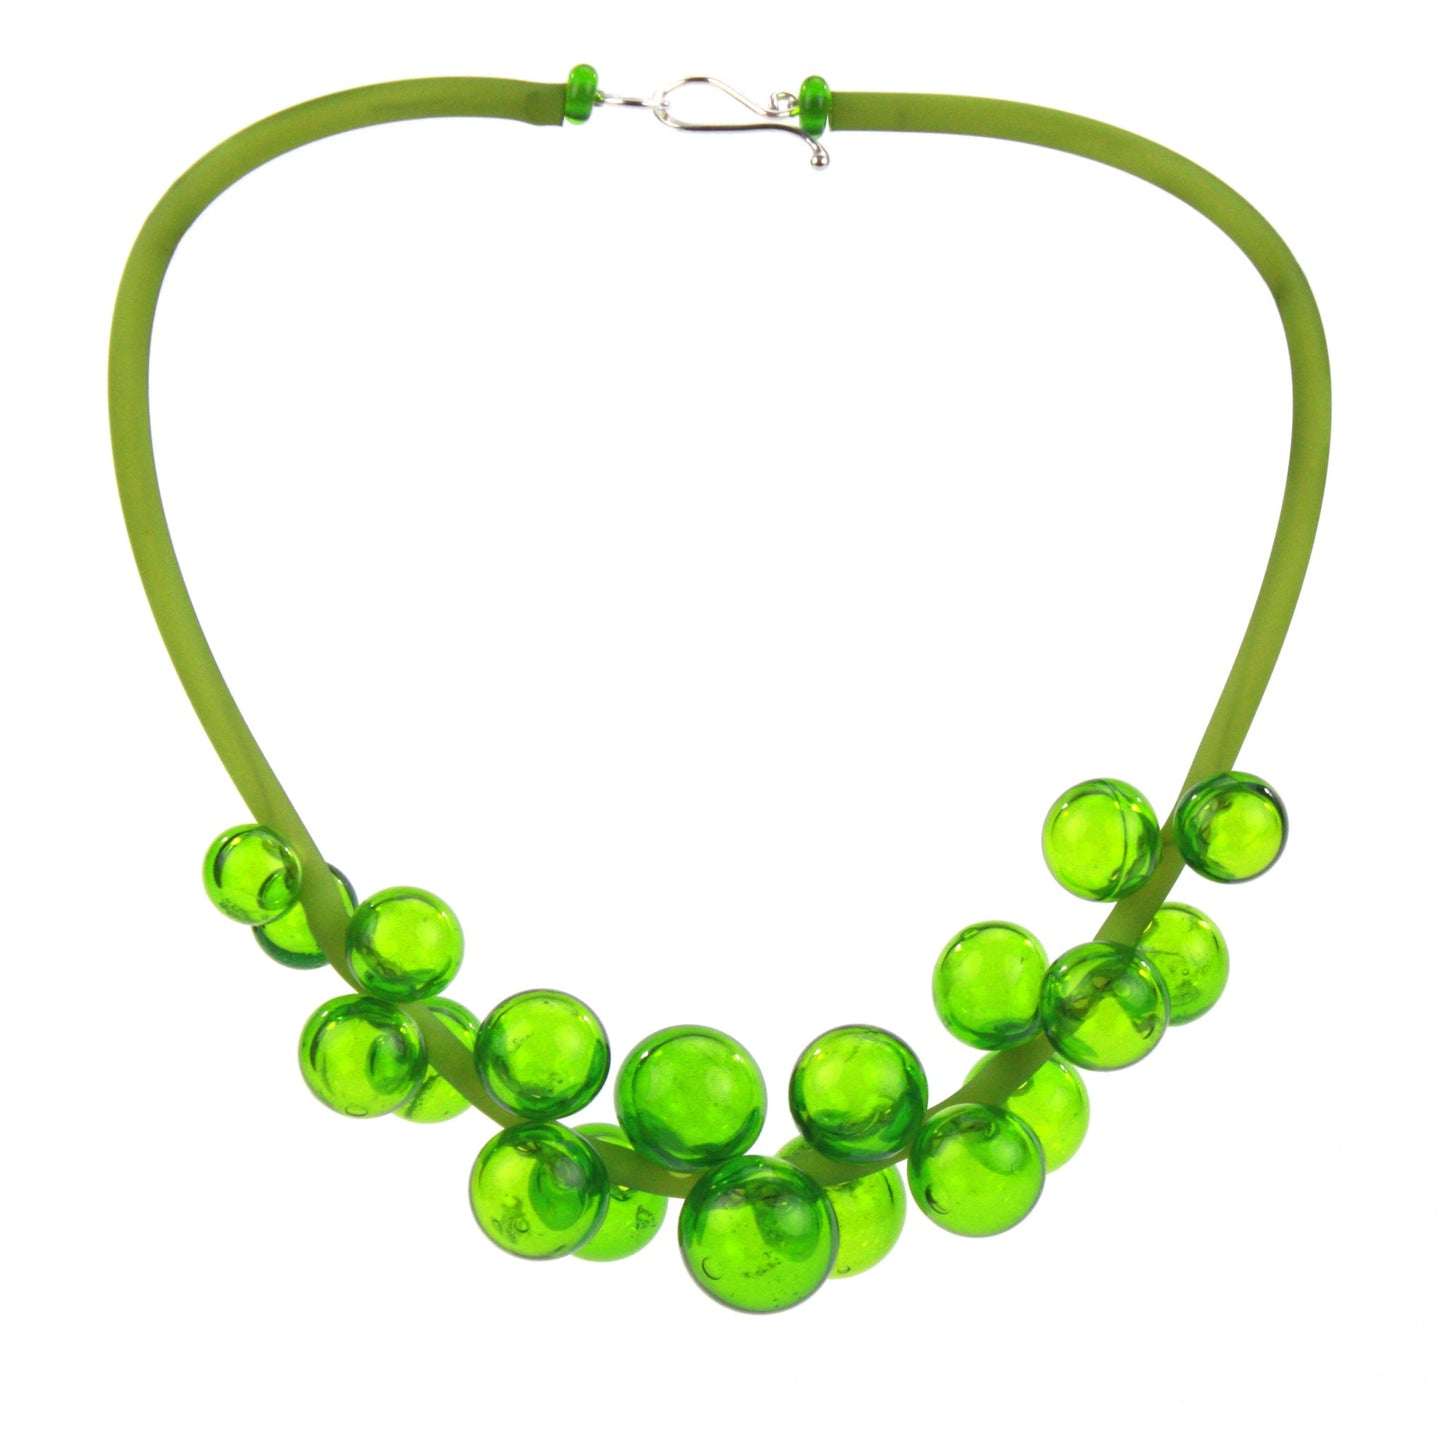 Chroma Bolla Necklace in Green